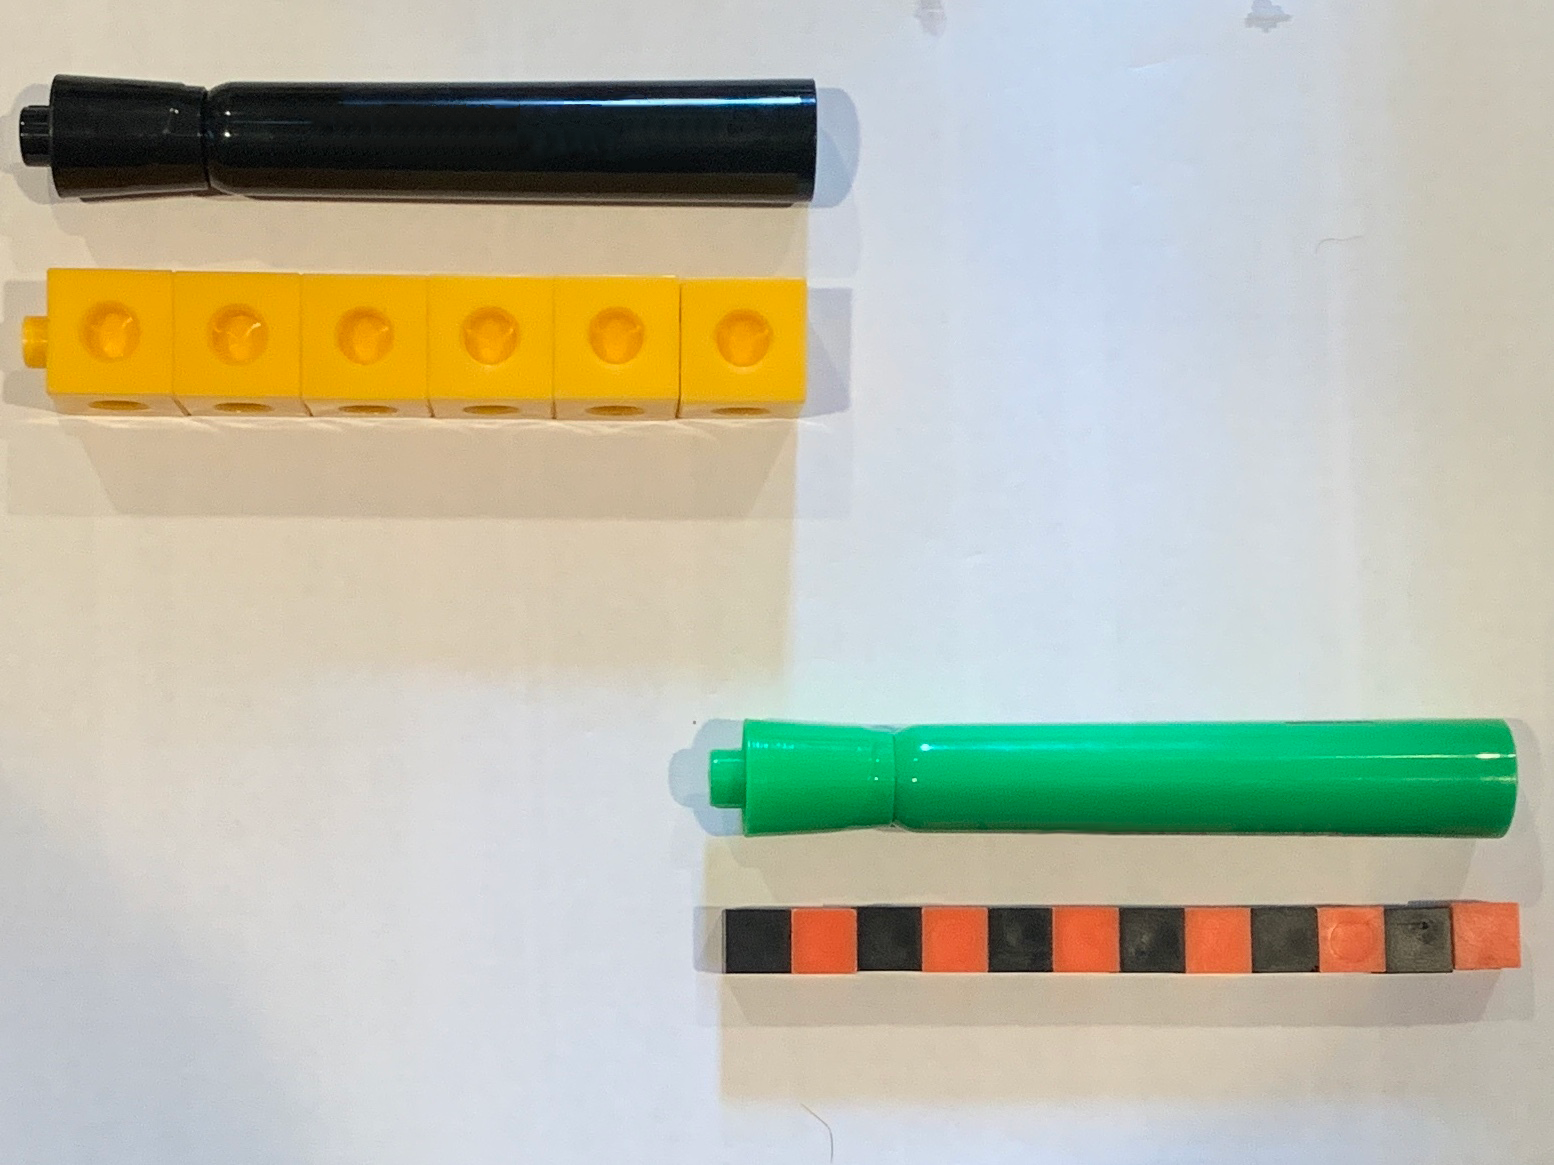 Markers with cubes below. Black marker, 6 connecting cubes. Green marker, 12 small cubes.